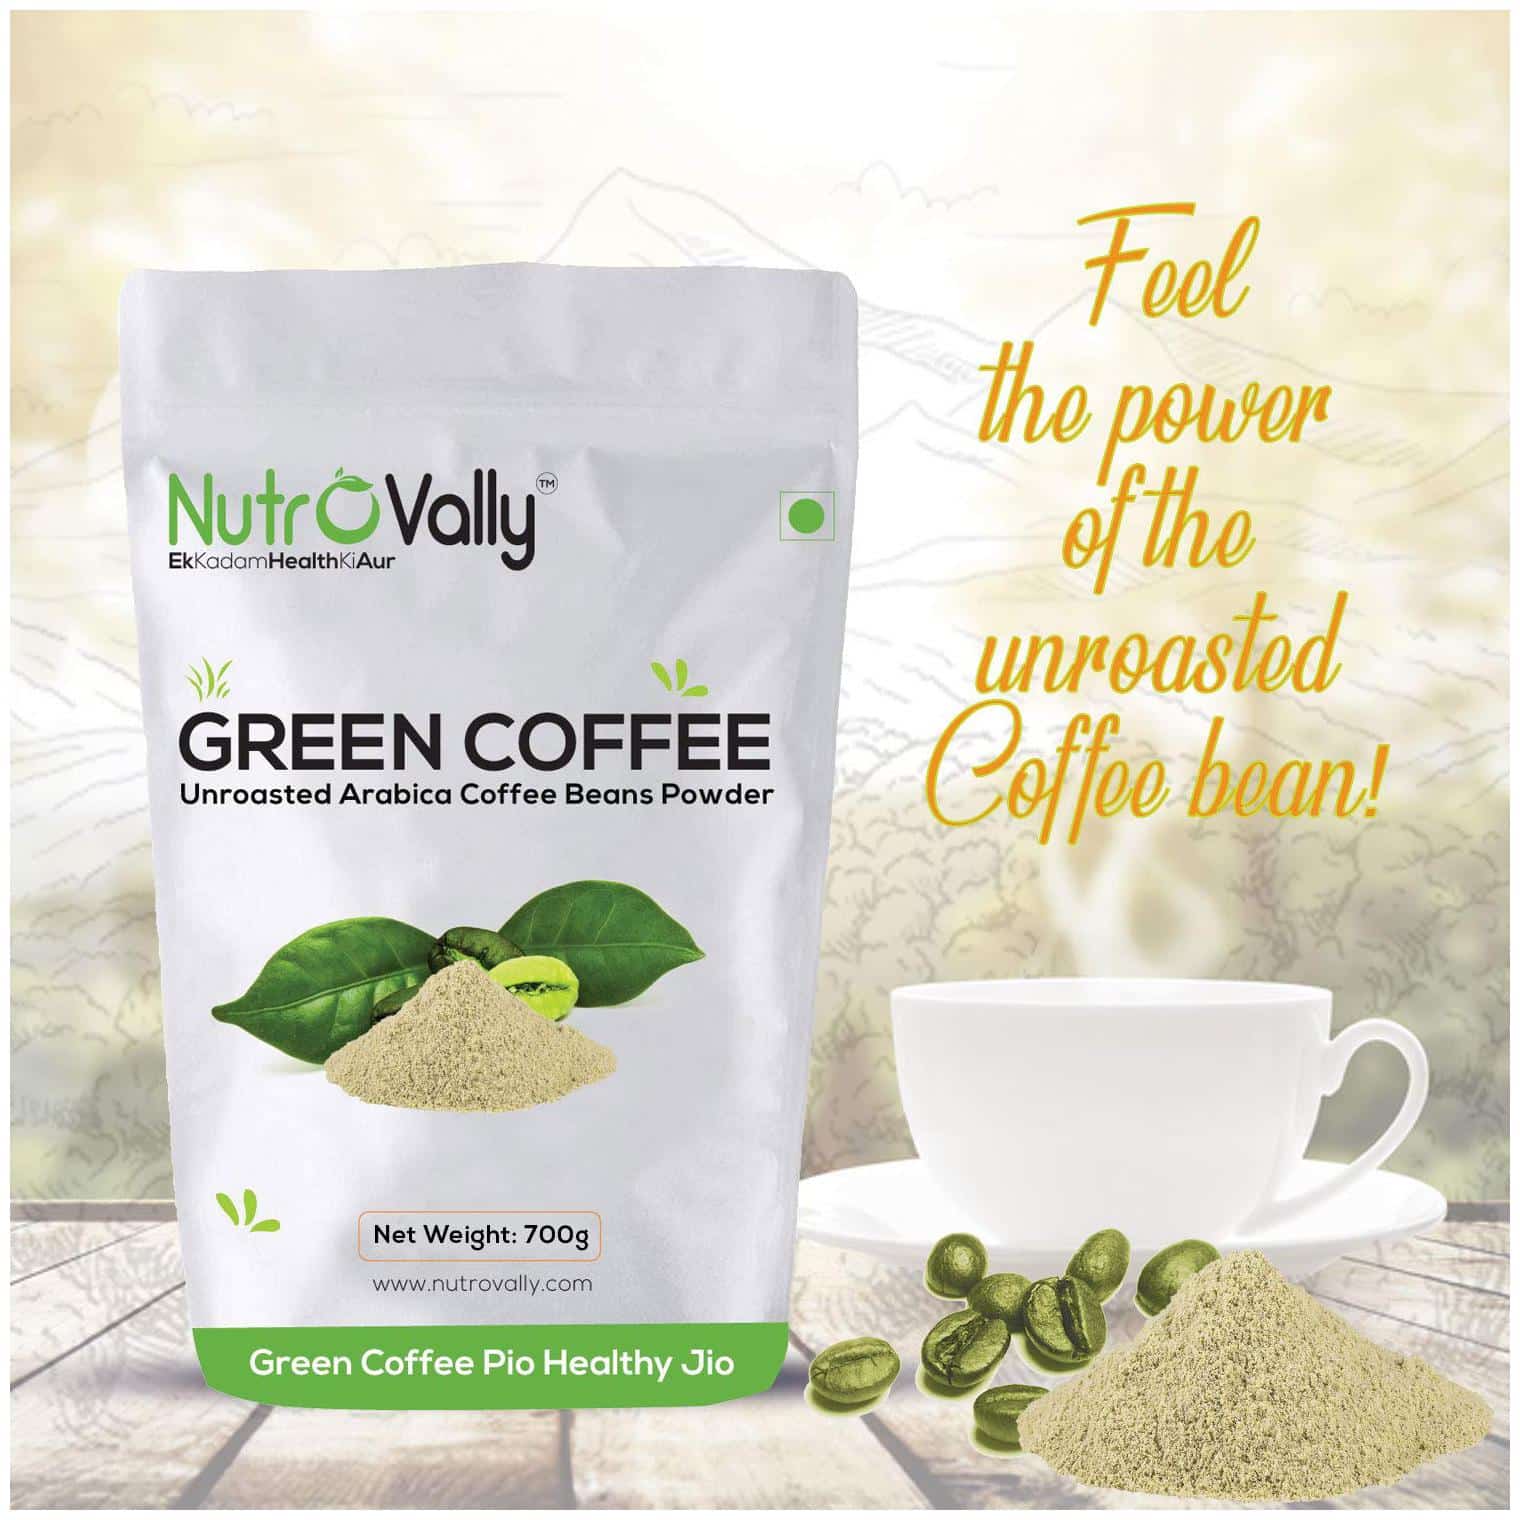 Nutrovally Organic green coffee powder for weight loss 700g